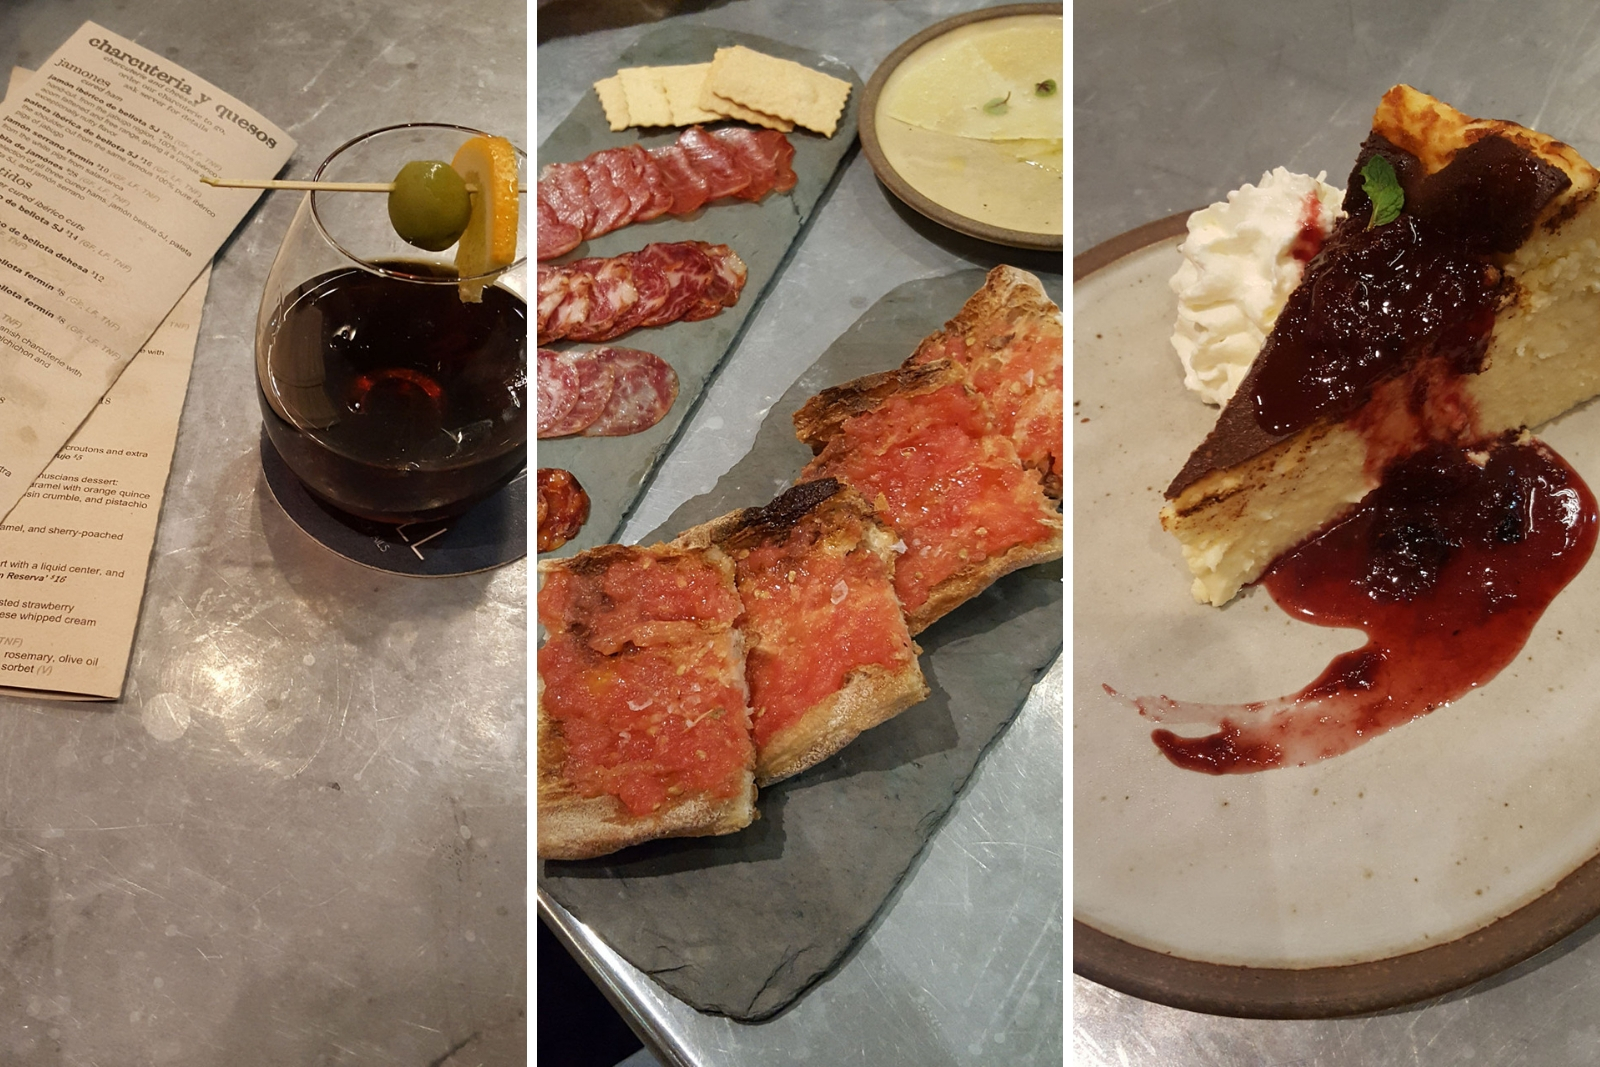 Dinner at curate - three dishes including cured meats cheese and dessert